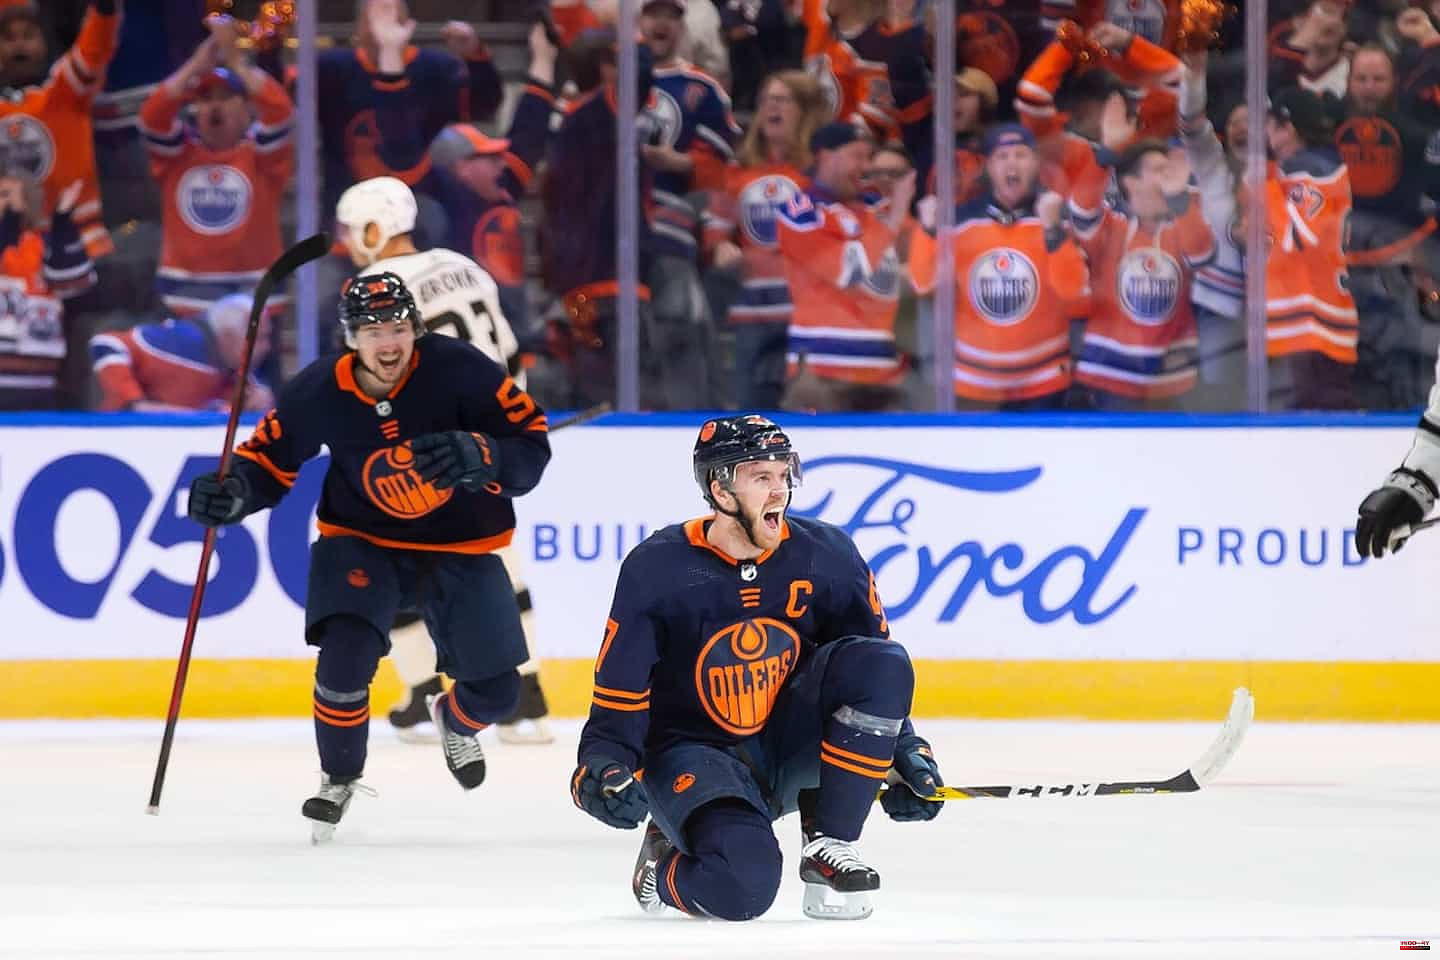 McDavid and the Oilers finally get the better of the Kings